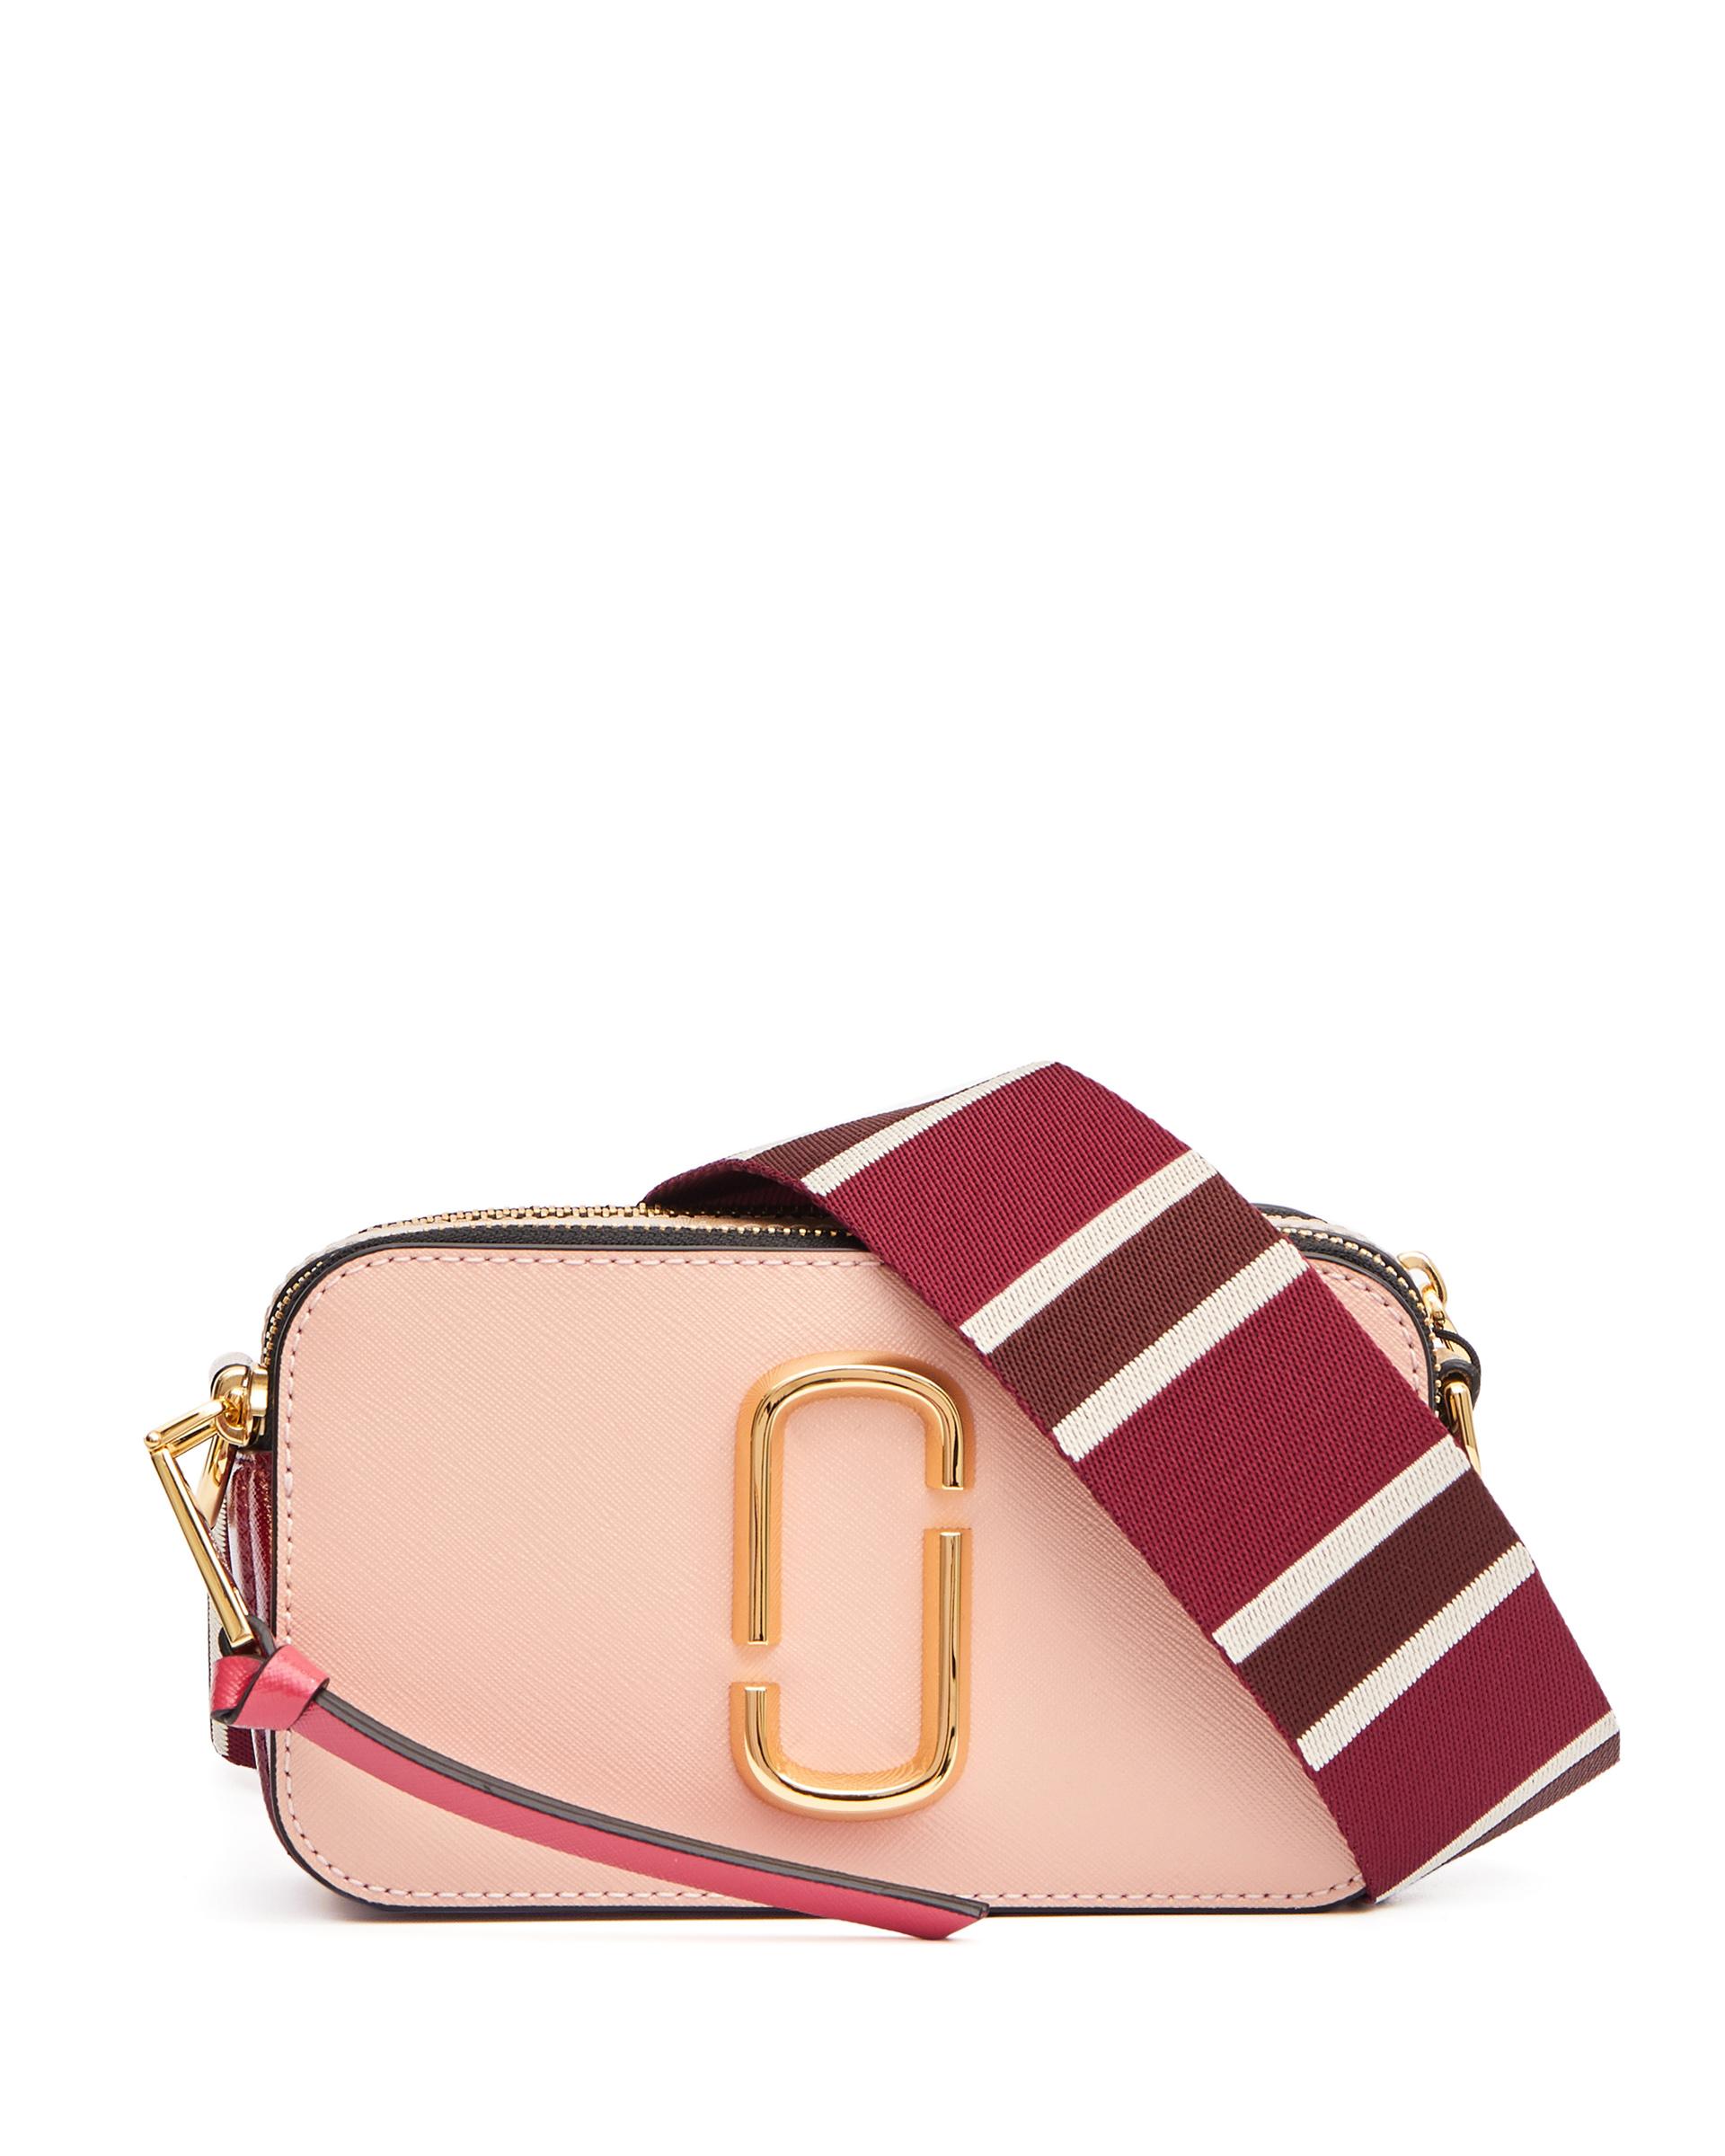 Marc Jacobs Leather Powder Pink Snapshot Bag - Lyst